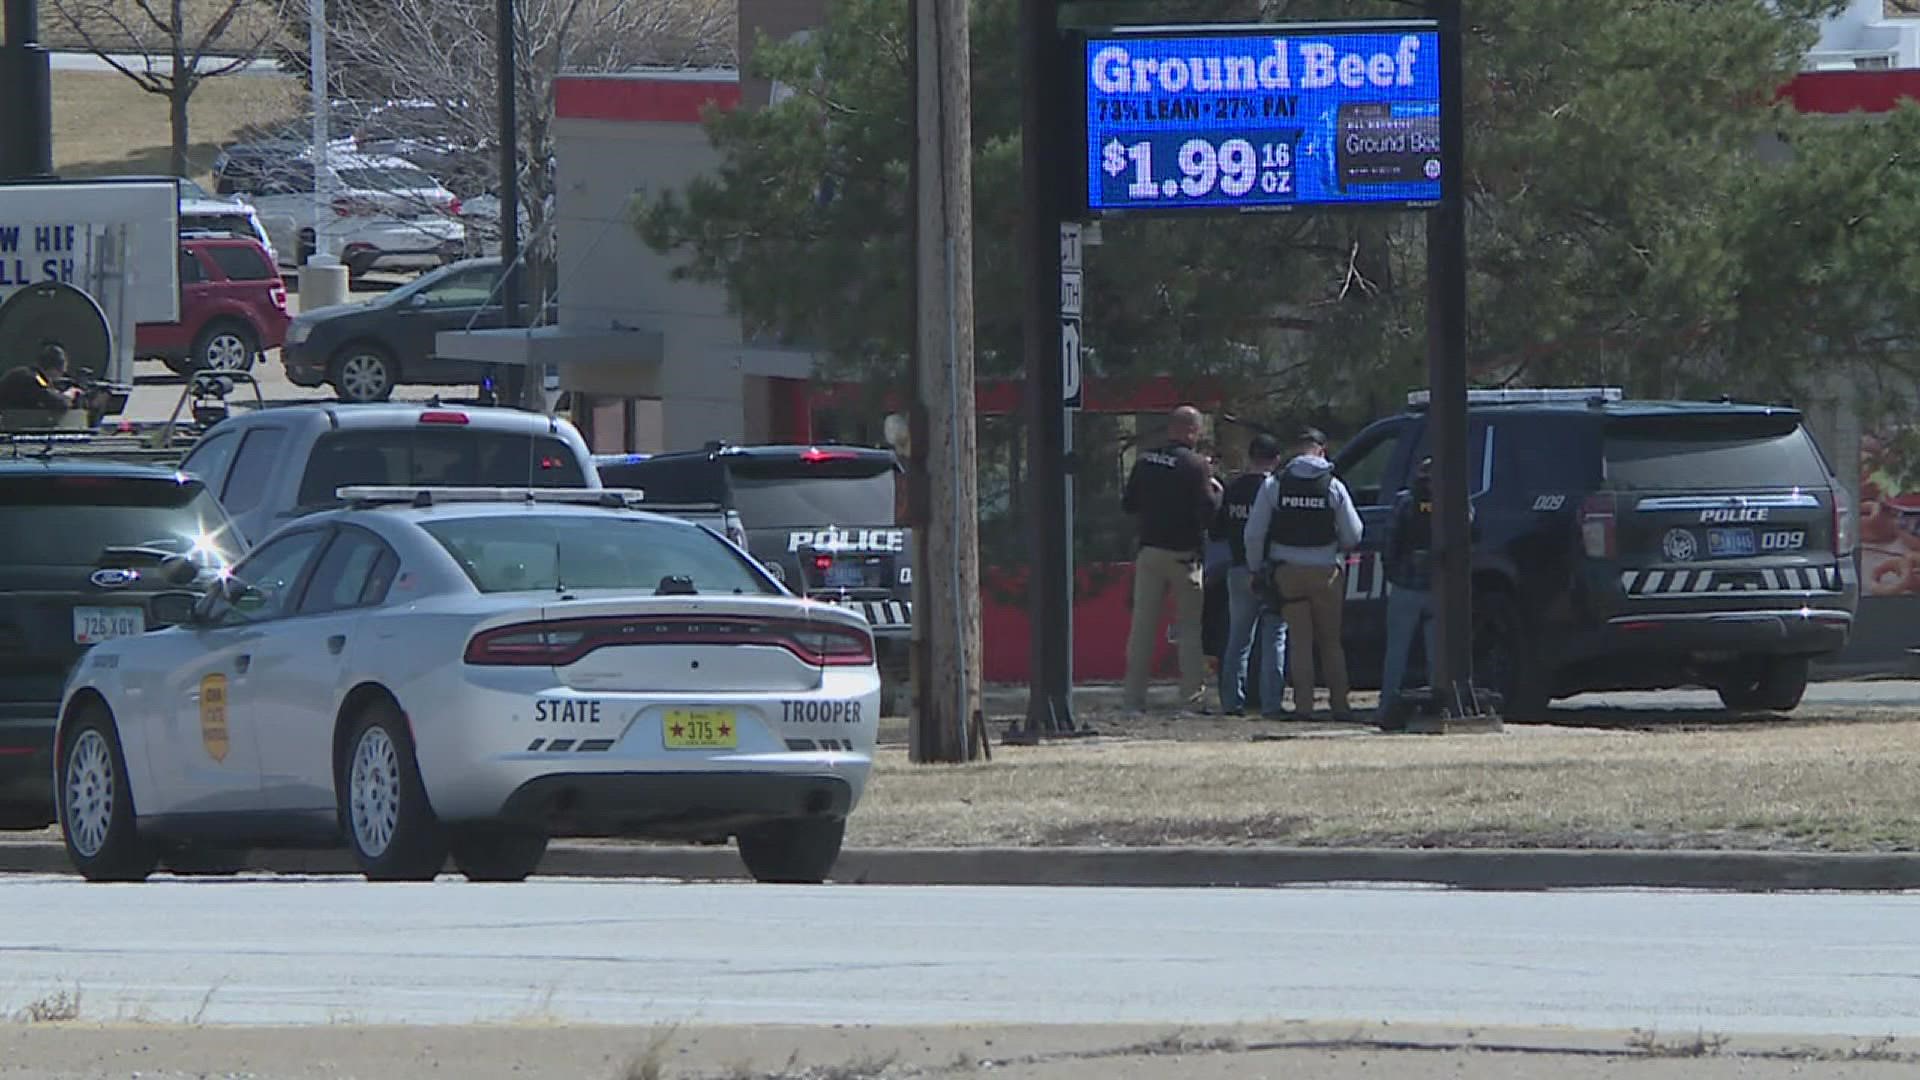 Several police agencies in Iowa and Illinois responded to a standoff that resulted in the suspect shooting himself Sunday.